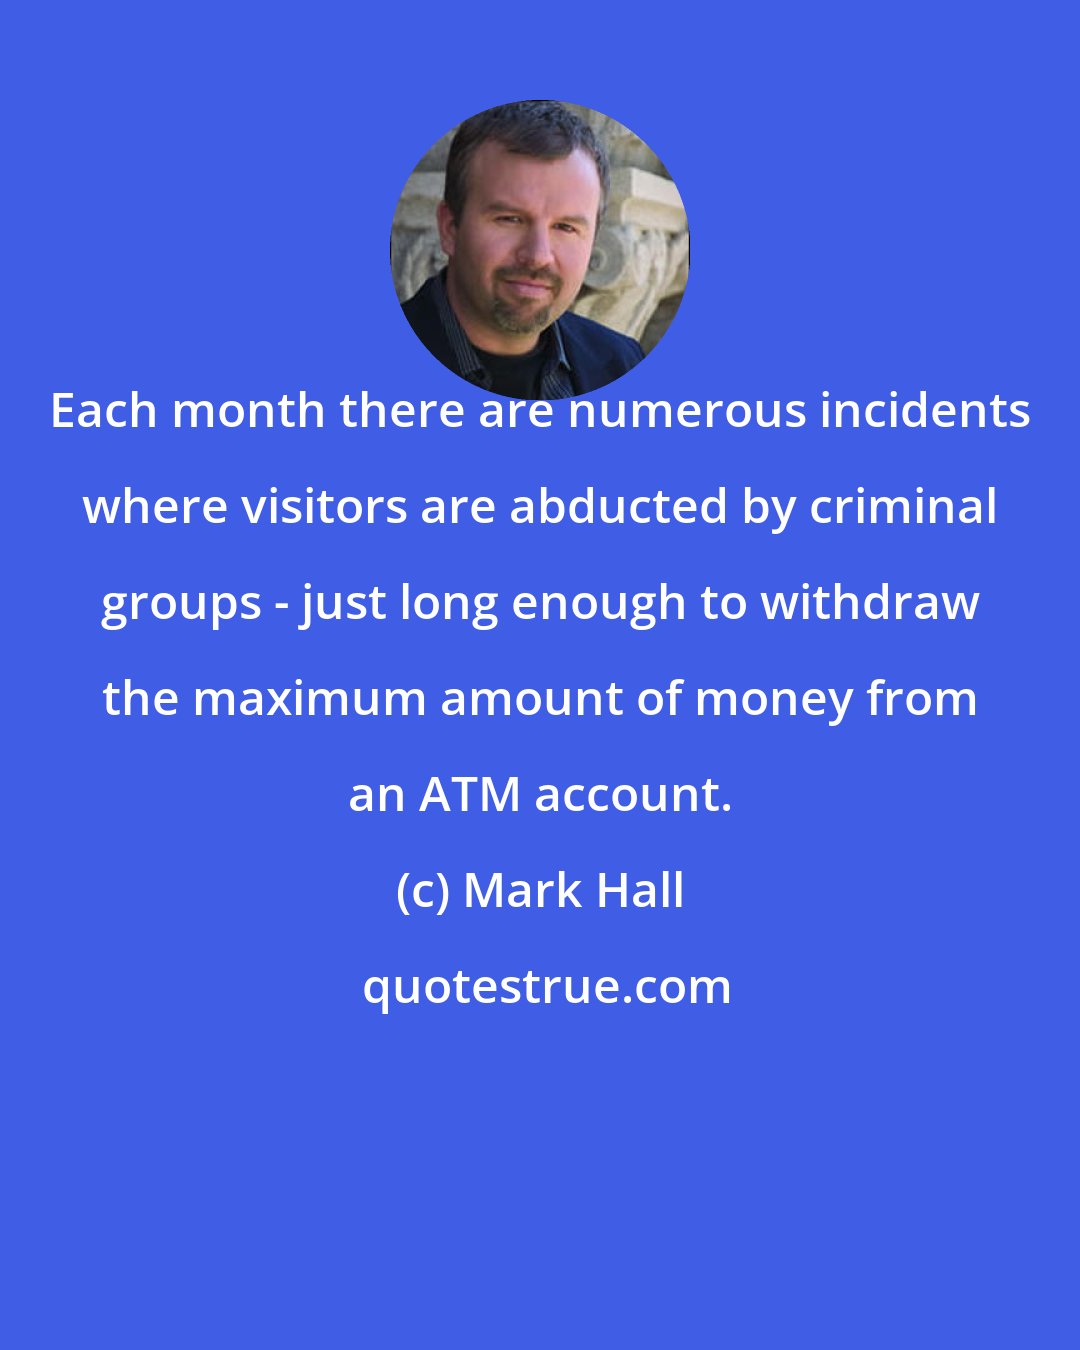 Mark Hall: Each month there are numerous incidents where visitors are abducted by criminal groups - just long enough to withdraw the maximum amount of money from an ATM account.